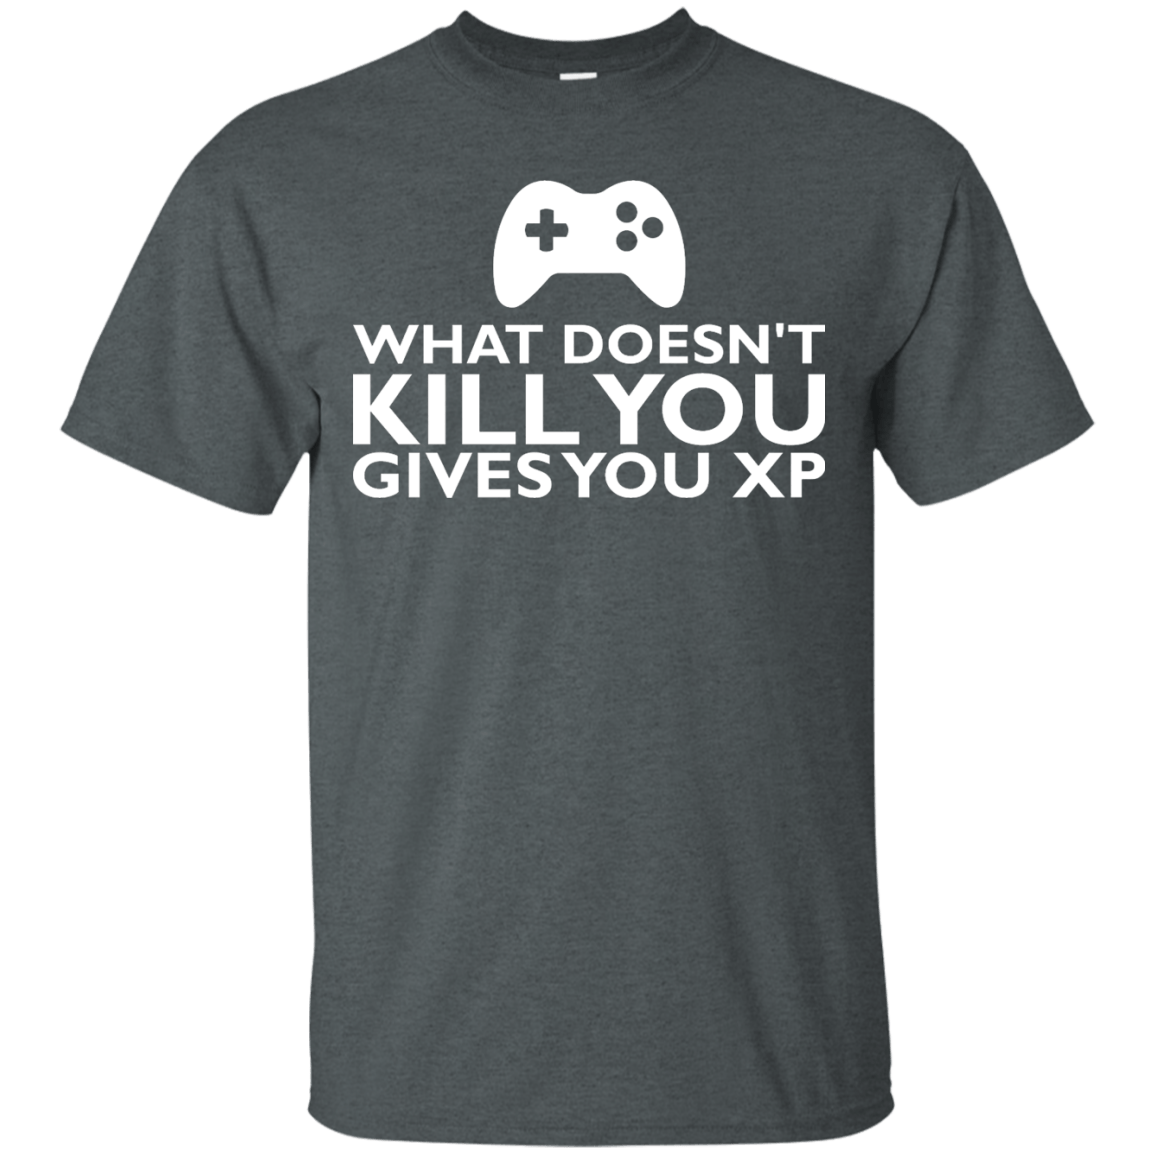 What Doesn't Kill You Gives You XP - Engineering Outfitters